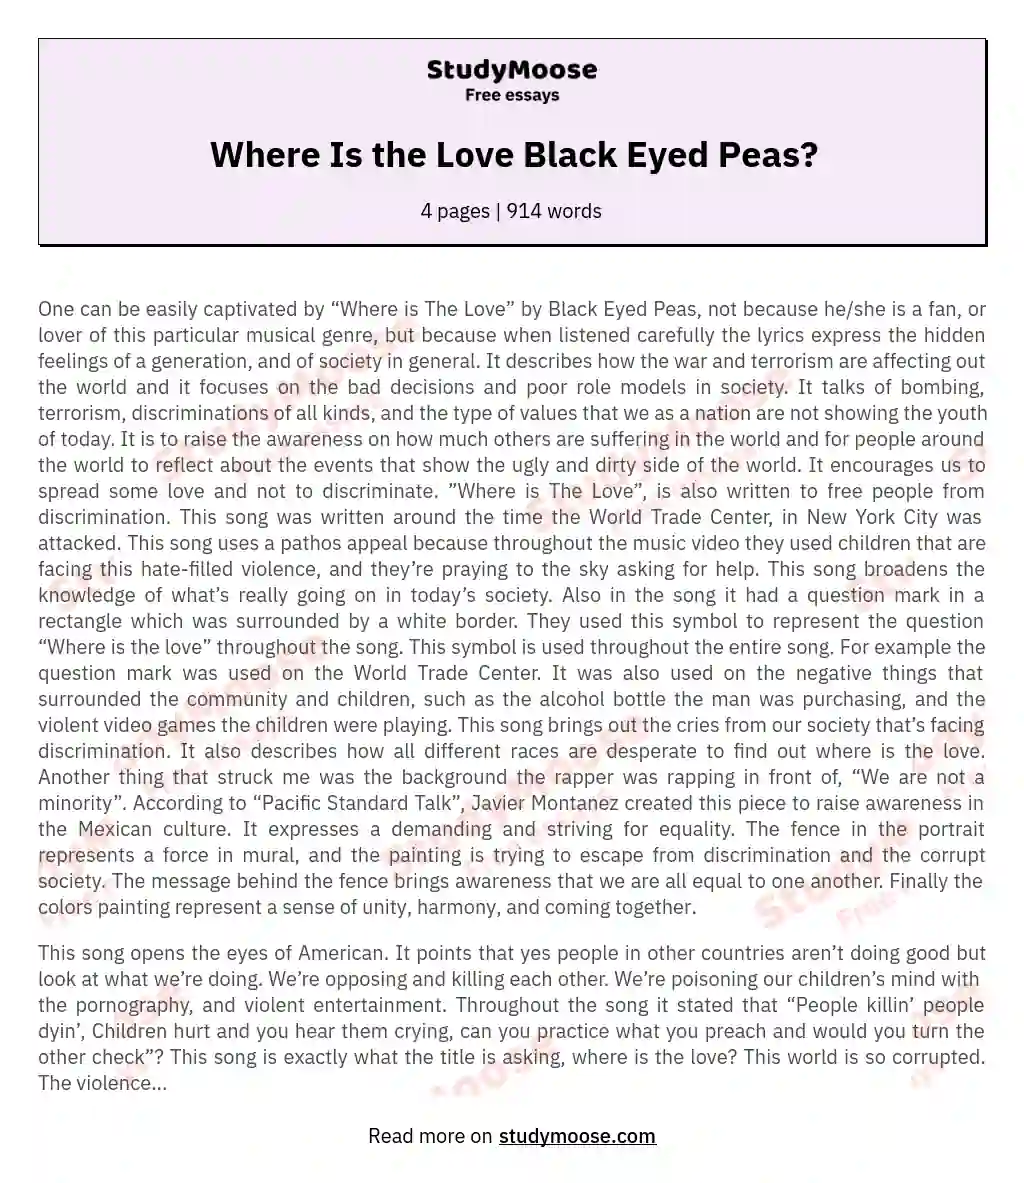 Where Is the Love Black Eyed Peas? essay